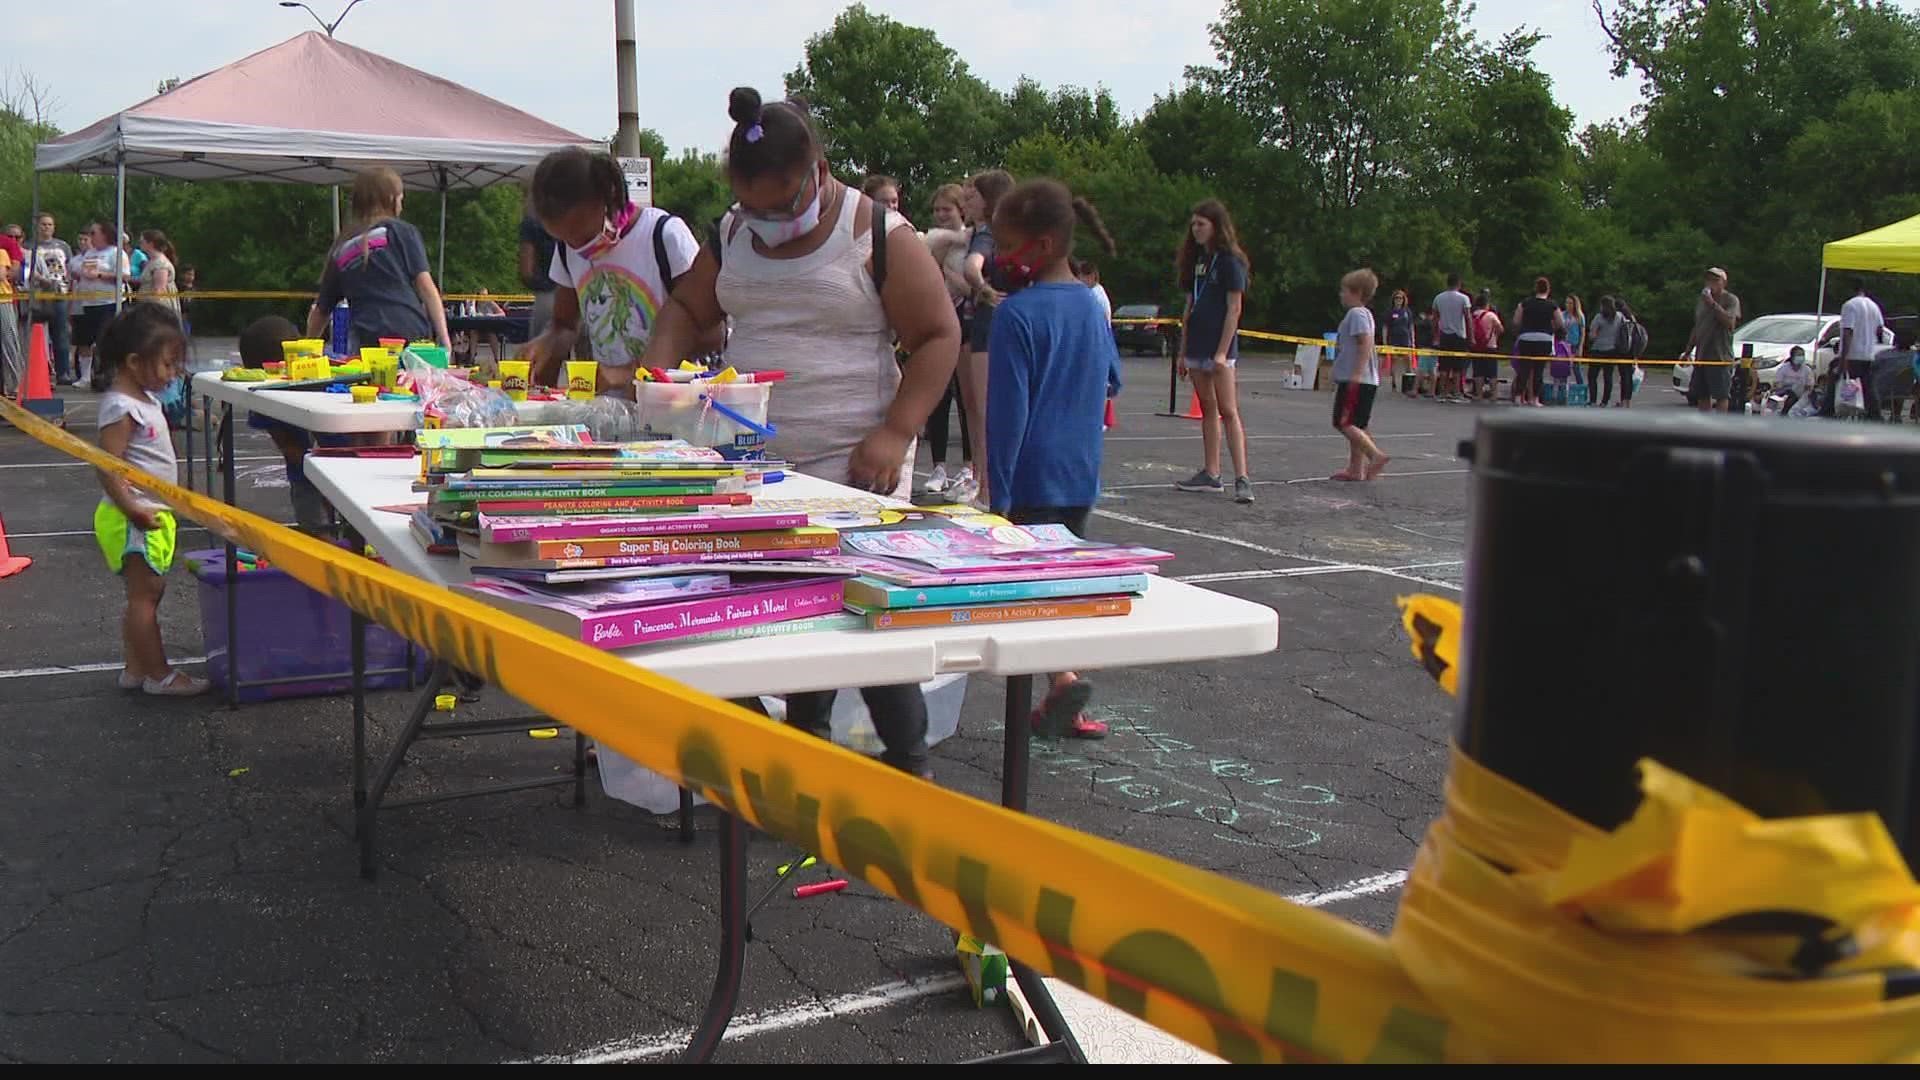 Volunteers with the nonprofit Dotted Line Divas helped hand out backpacks, health products, and classroom supplies, and also provided free haircuts.